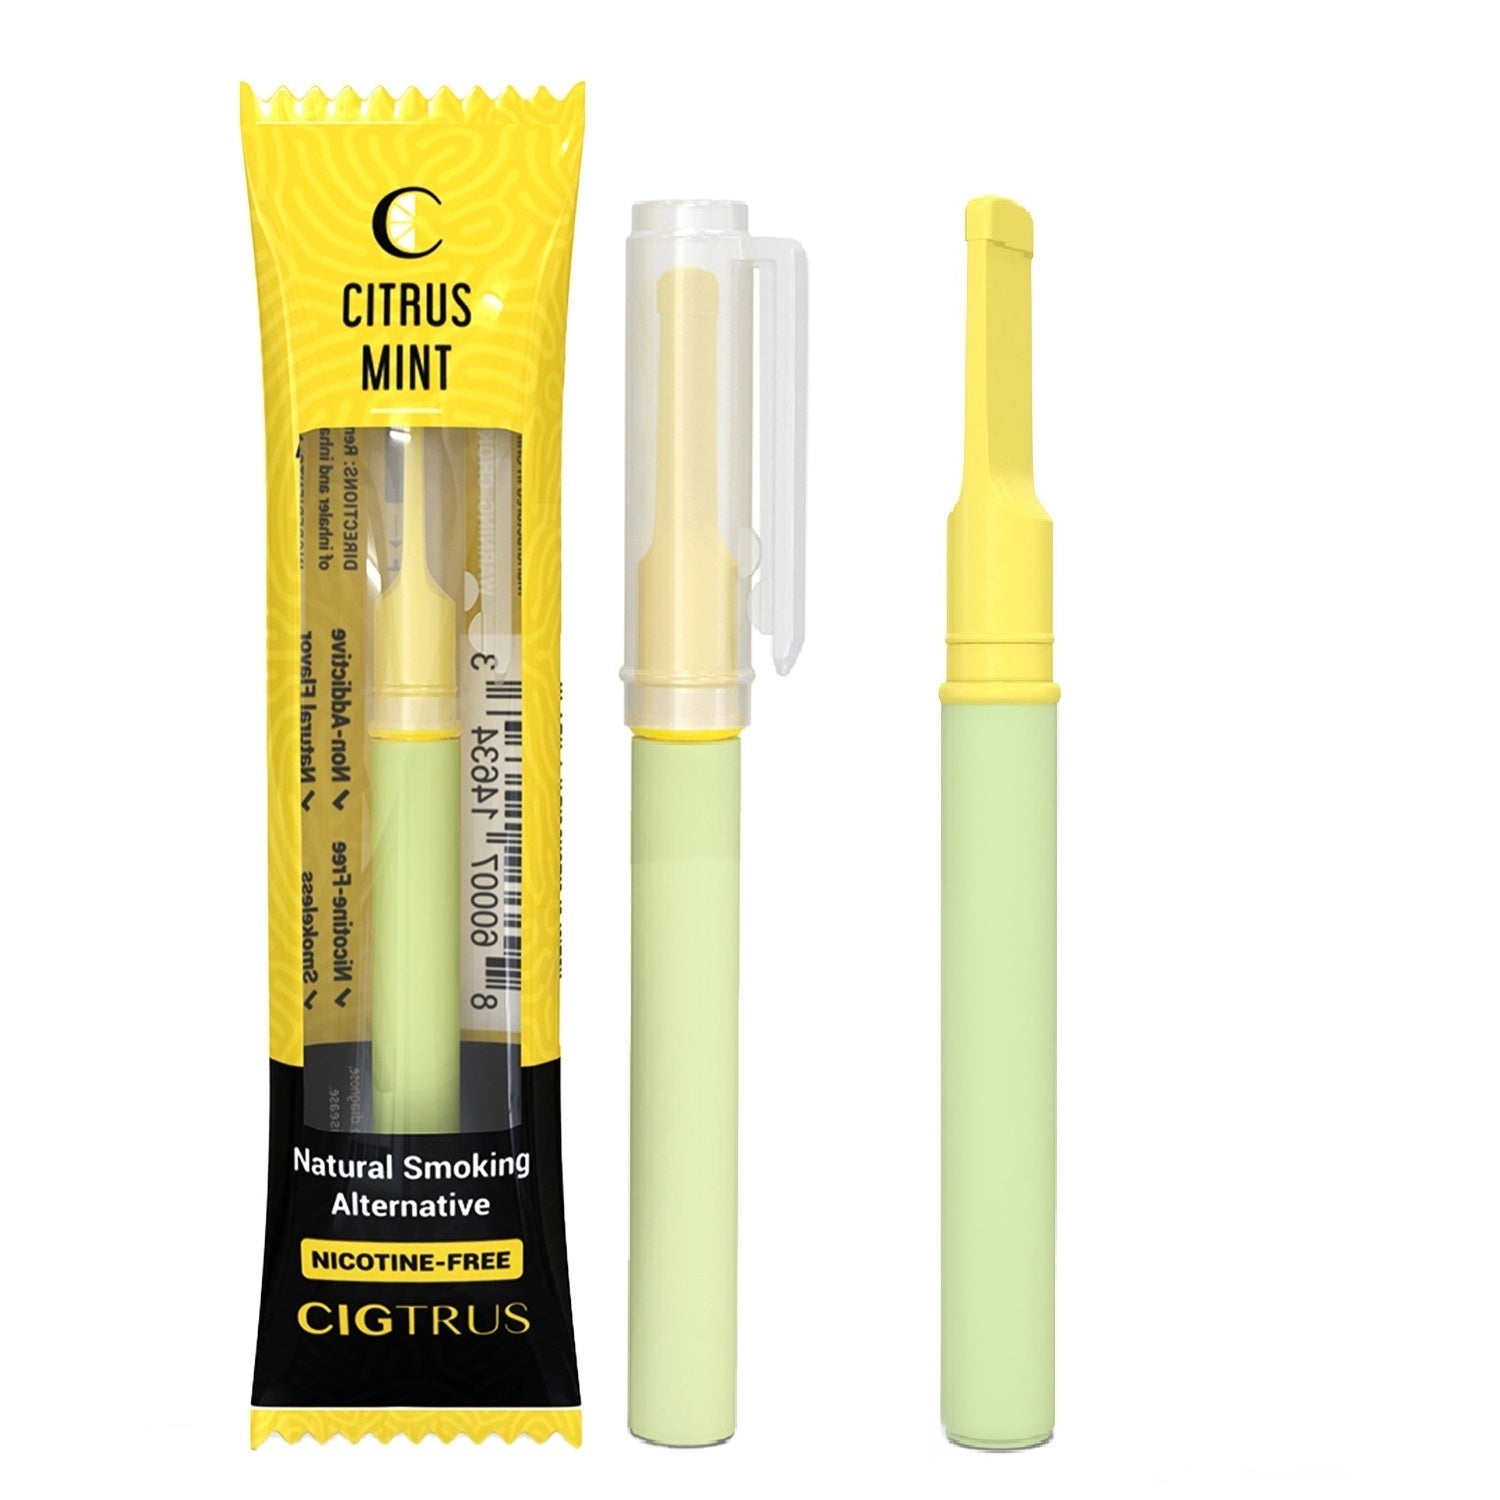 Store Display - Cigtrus Aromatic Smokeless Oxygen Air Inhaler Oral Fixation Relief Natural Quit Aid Behavioral Support – Citrus Mint Flavor 3 Pack - cigtrus.comcigtrus.com